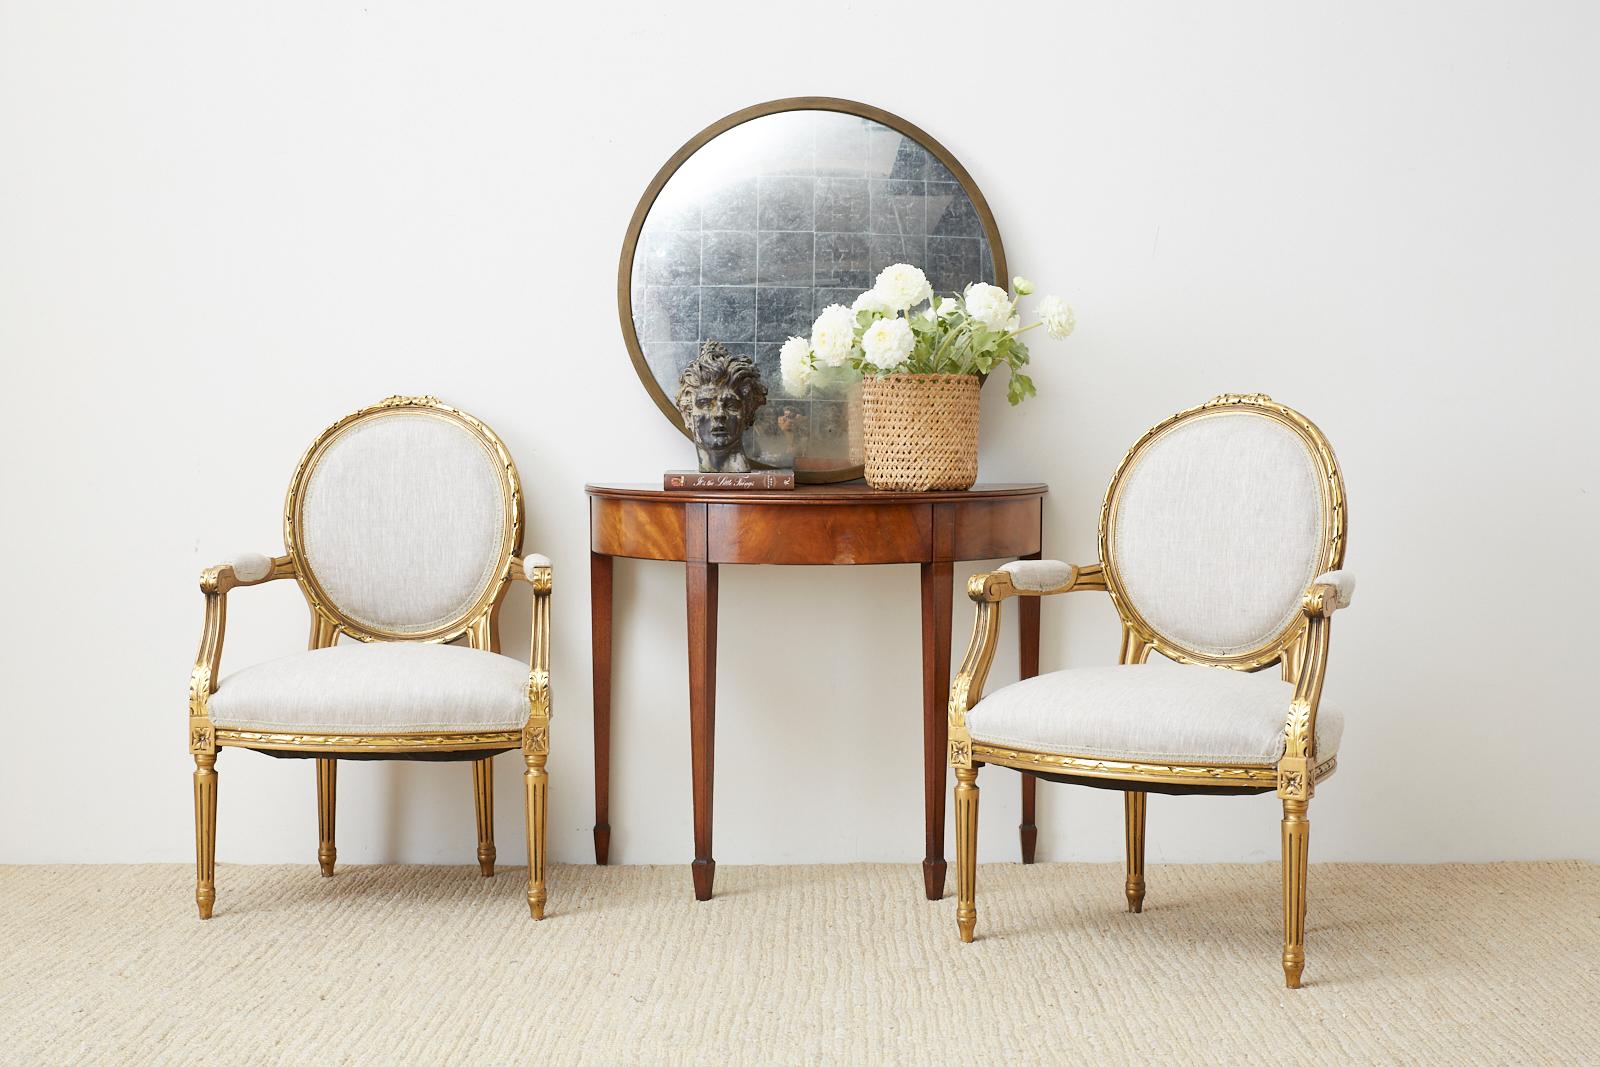 Lavish pair of French giltwood fauteuil armchairs hand carved in the Louis XVI taste. The beautiful frames have a round back and feature a new organic linen upholstery. The seats are embellished with decorative rosettes on the corners and they are